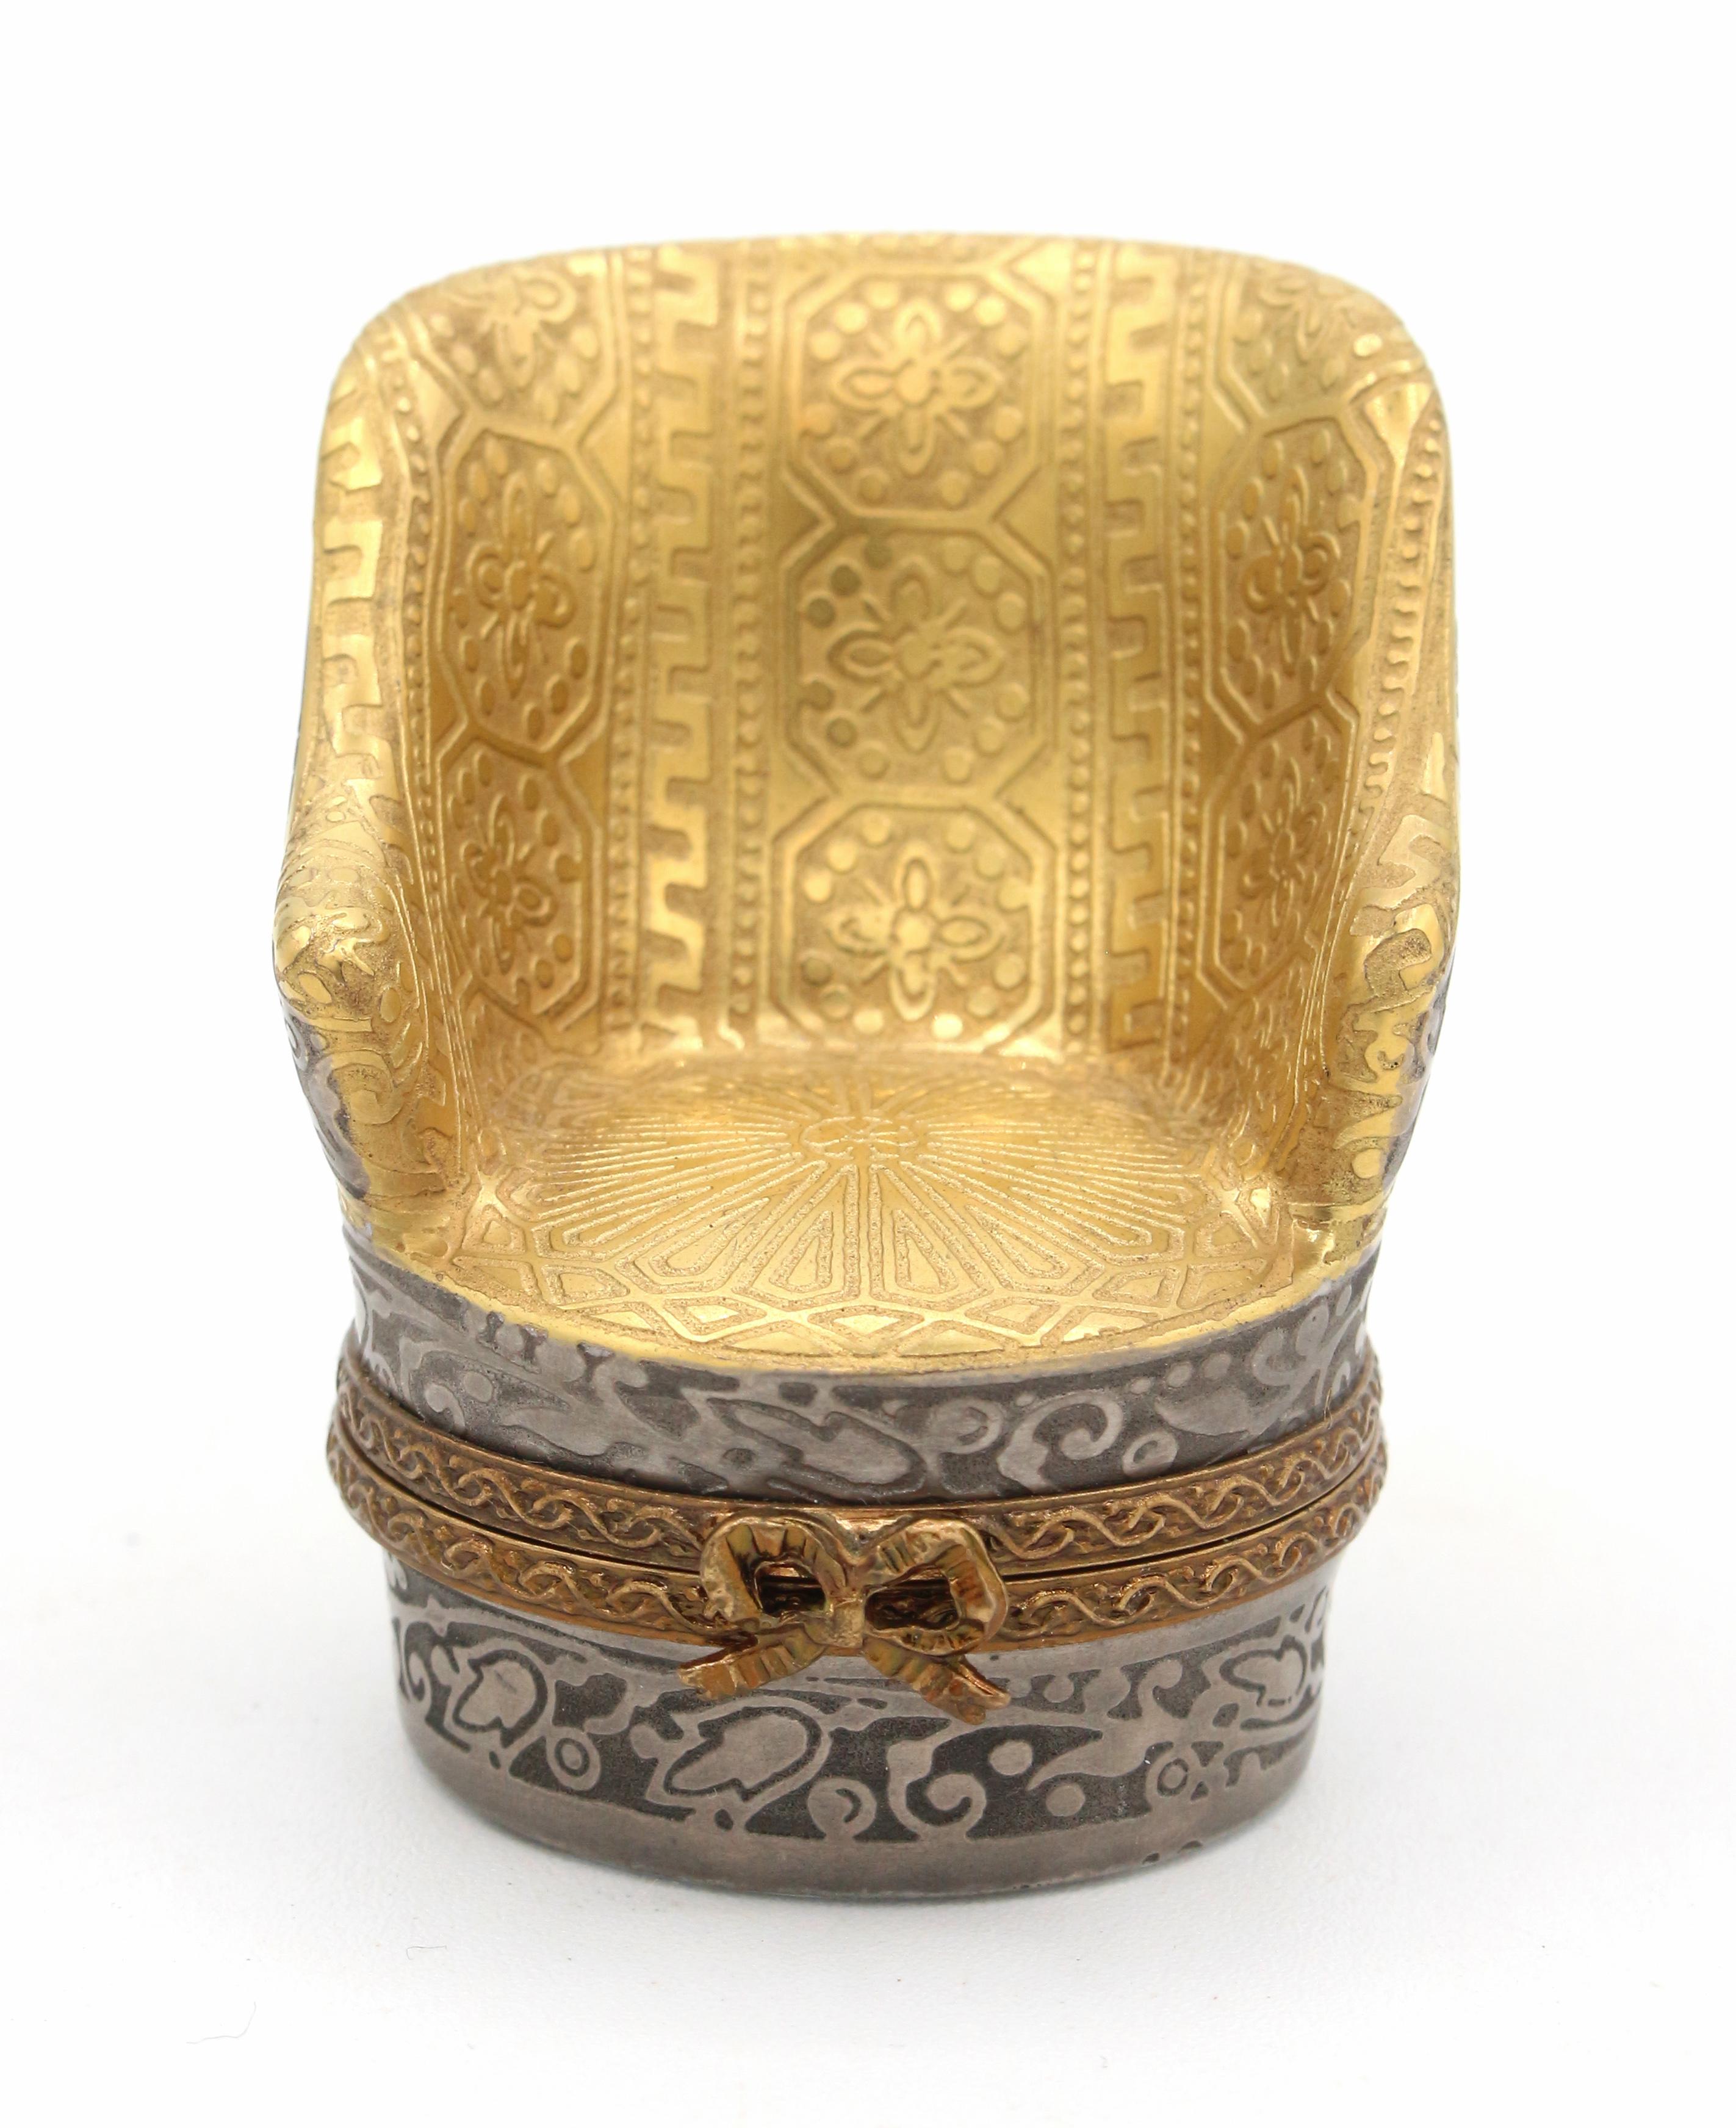 Limoges trinket or pill box in the form of a bergere chair, French later 20th century. 24k gold & silver encrused. Marked: Limoges France, Peint main, Incrustation or fin (painted by hand, fine gold inlay), & artist's mark. 
1 5/8